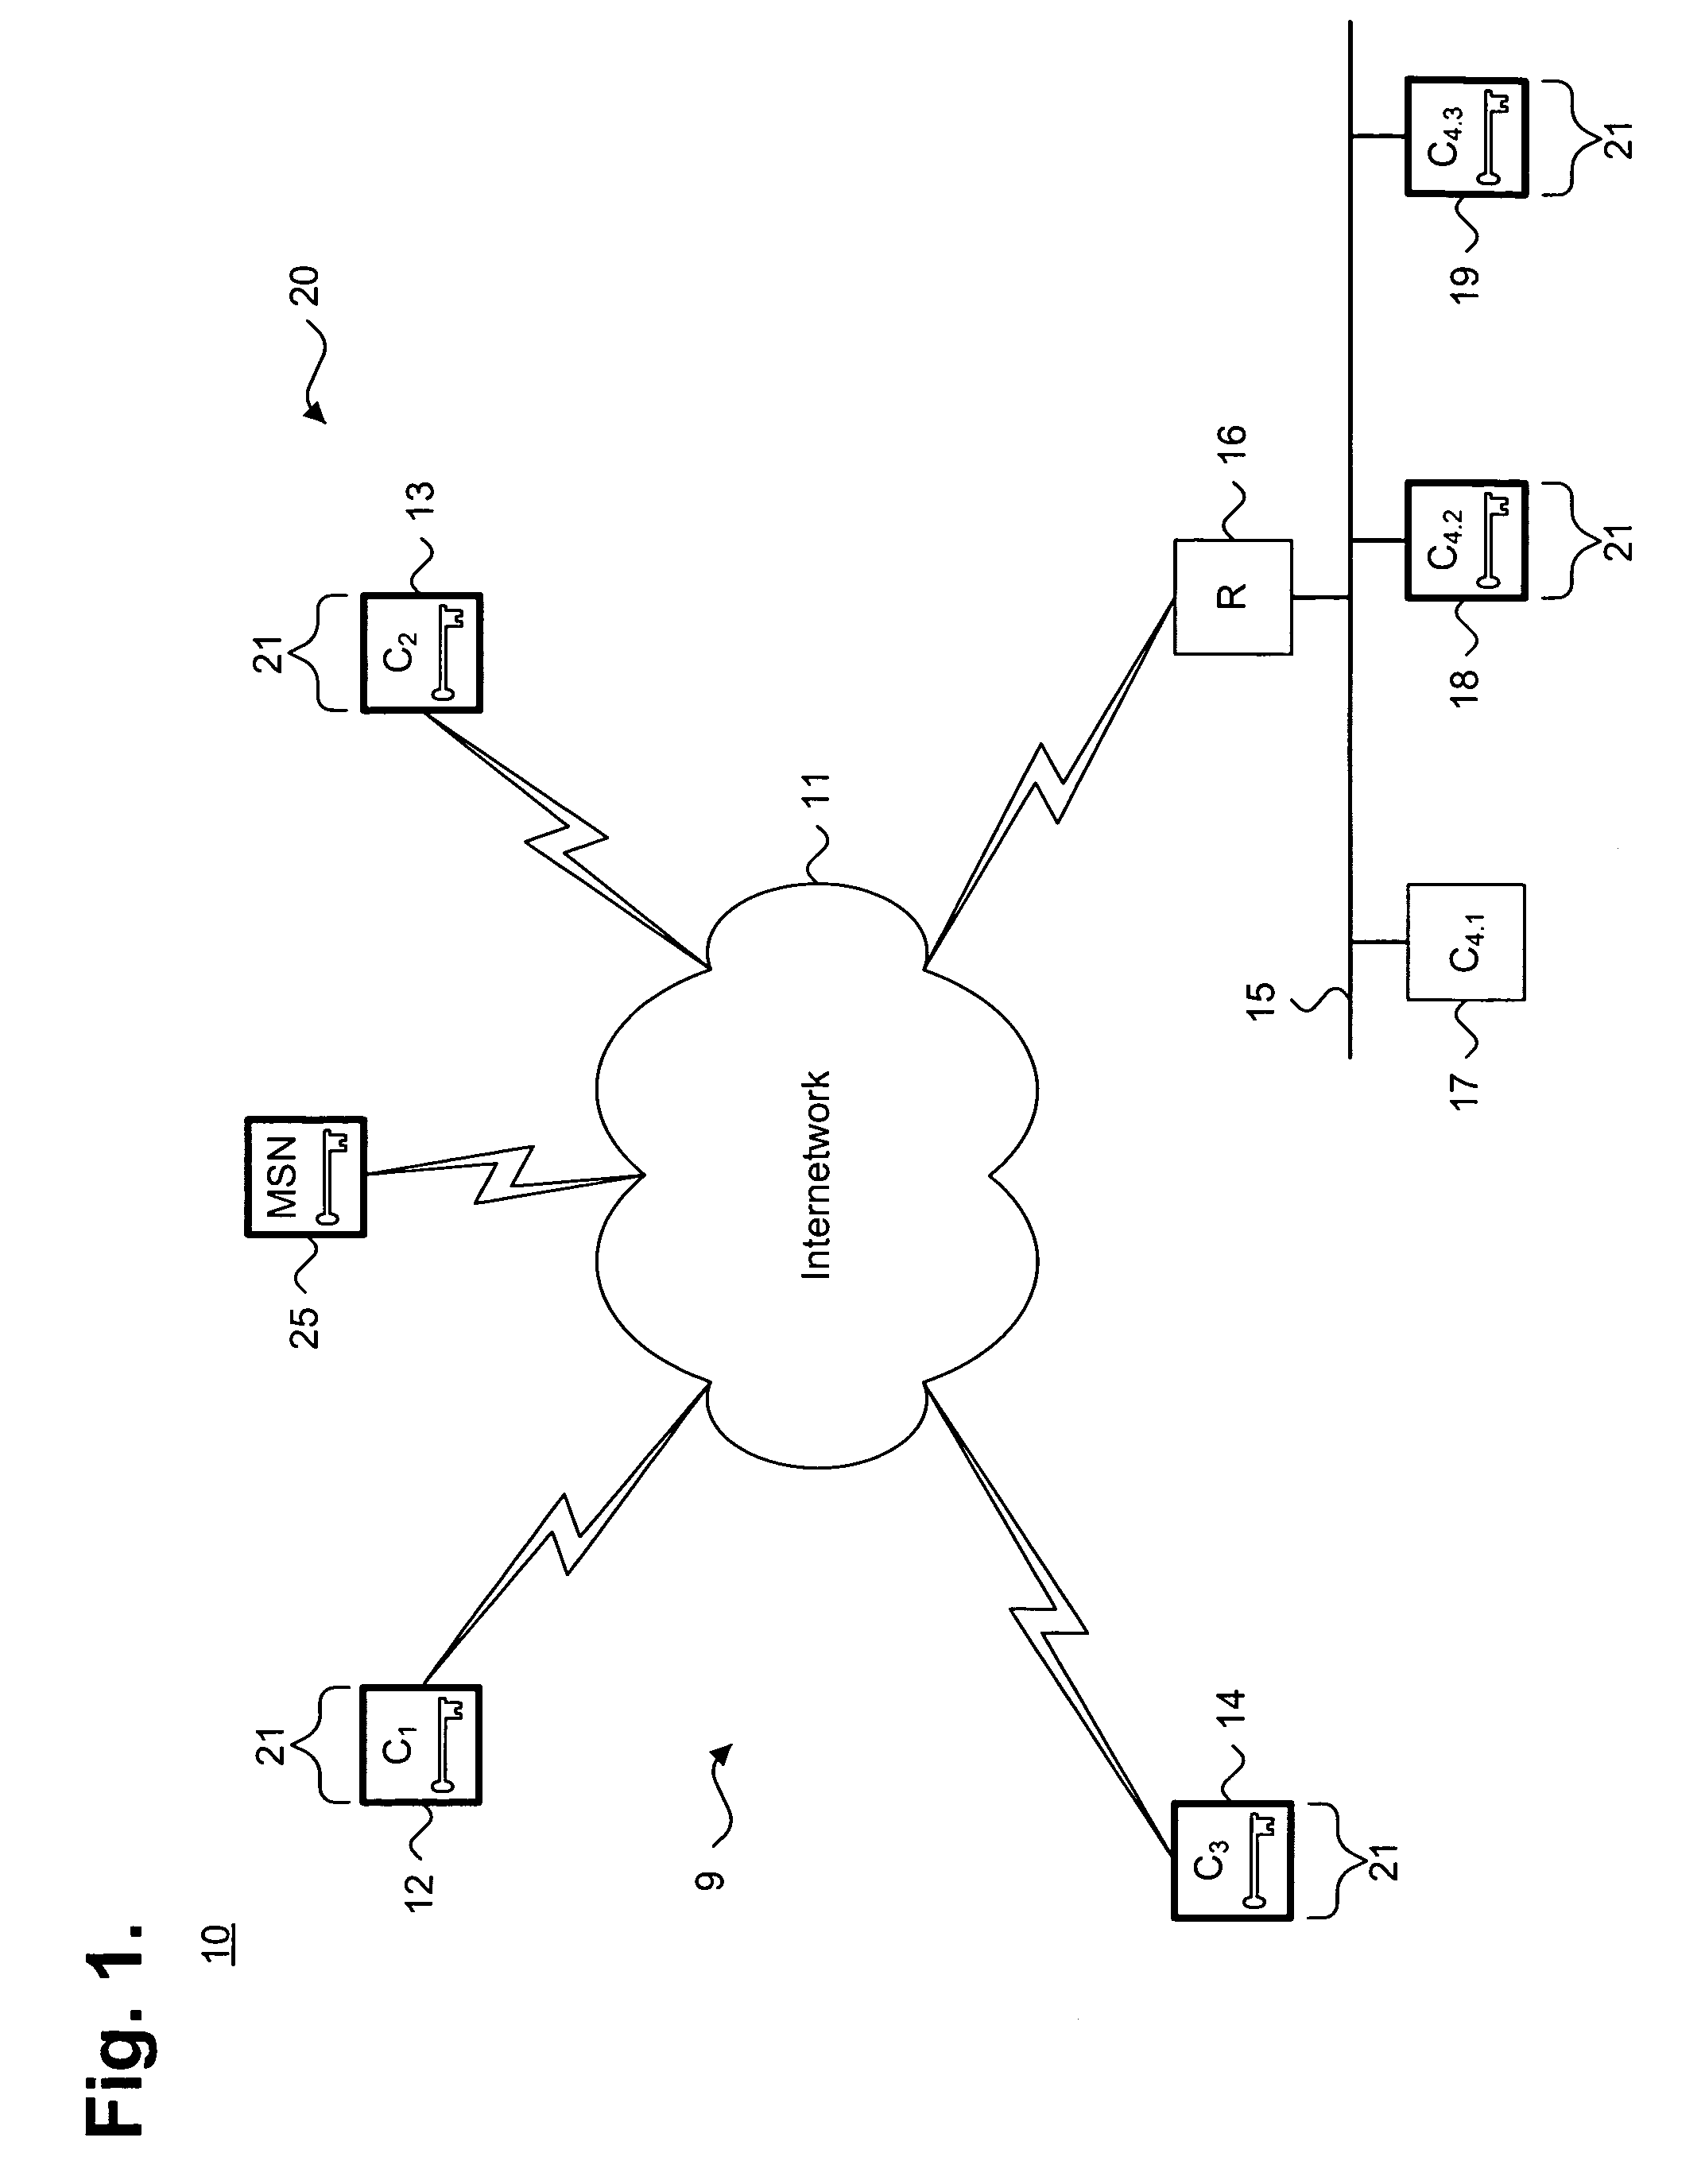 System and method for providing a peer indexing service